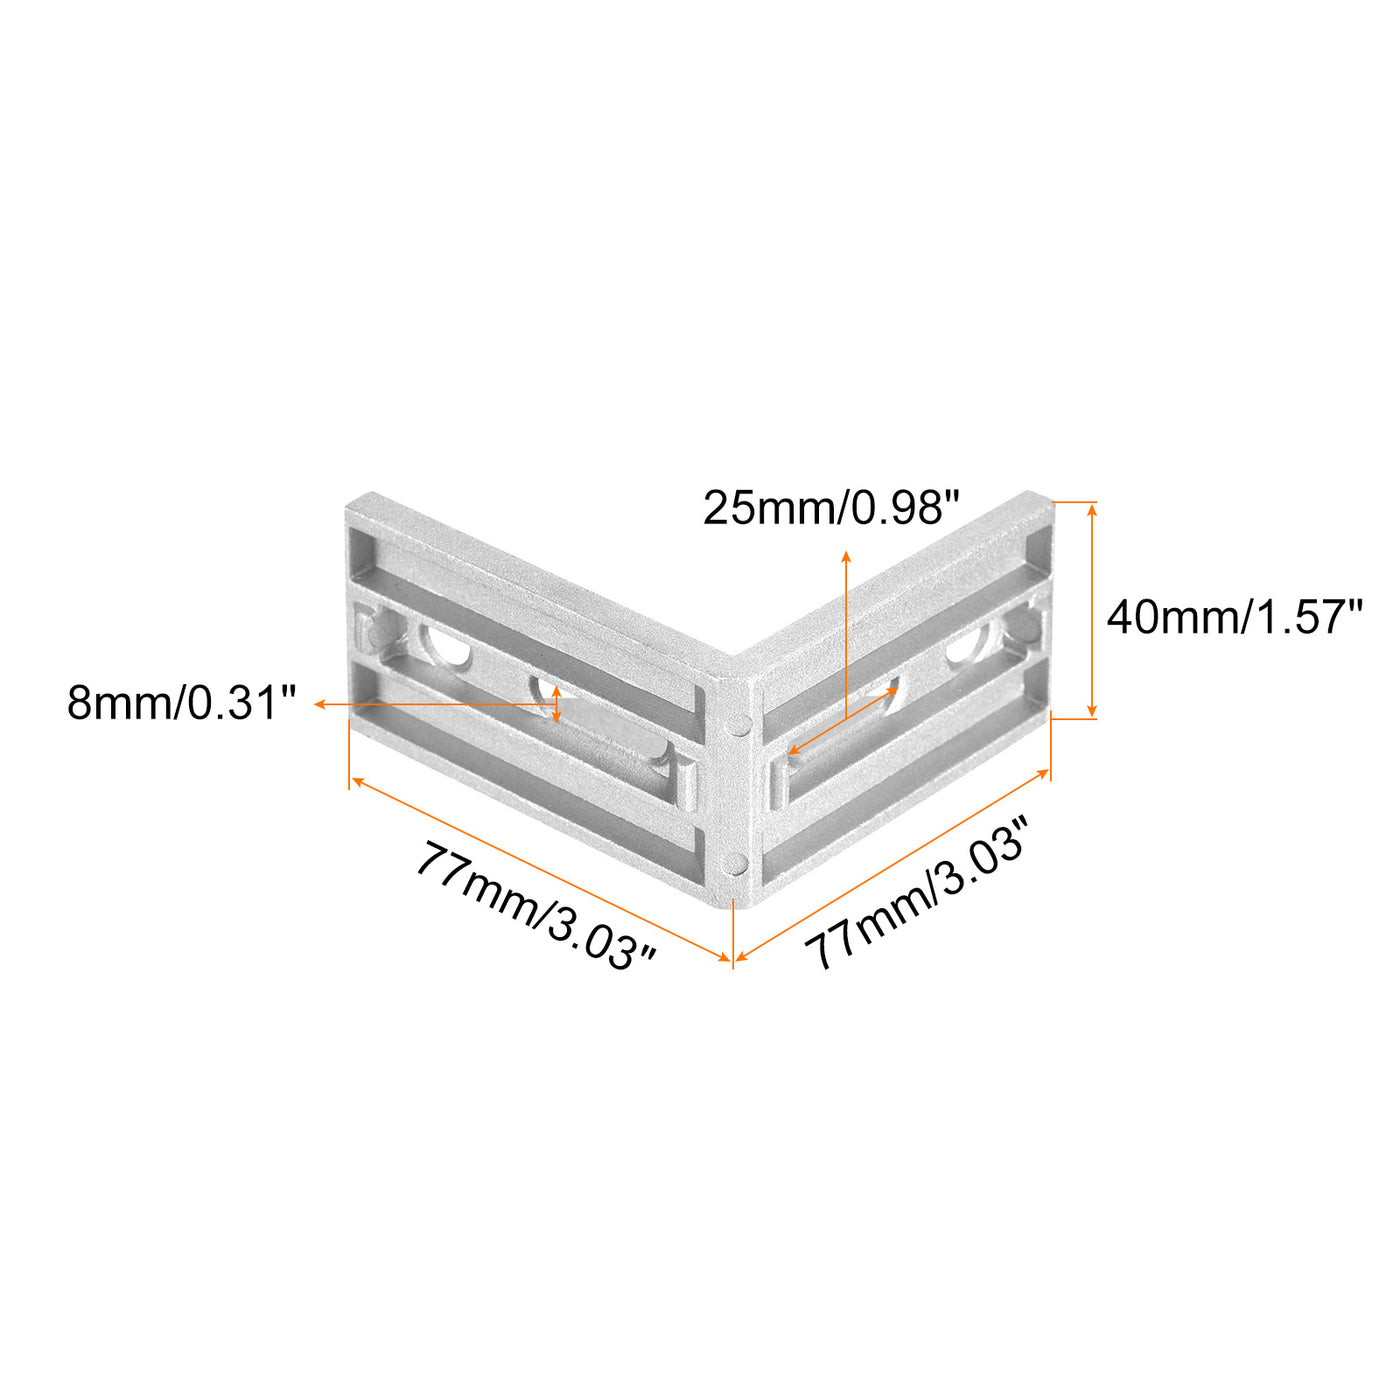 uxcell Uxcell 5Pcs Inside Corner Bracket Gusset, 77x77x40mm 4080 Angle Connectors for 4040/4080 Series Aluminum Extrusion Profile Silver